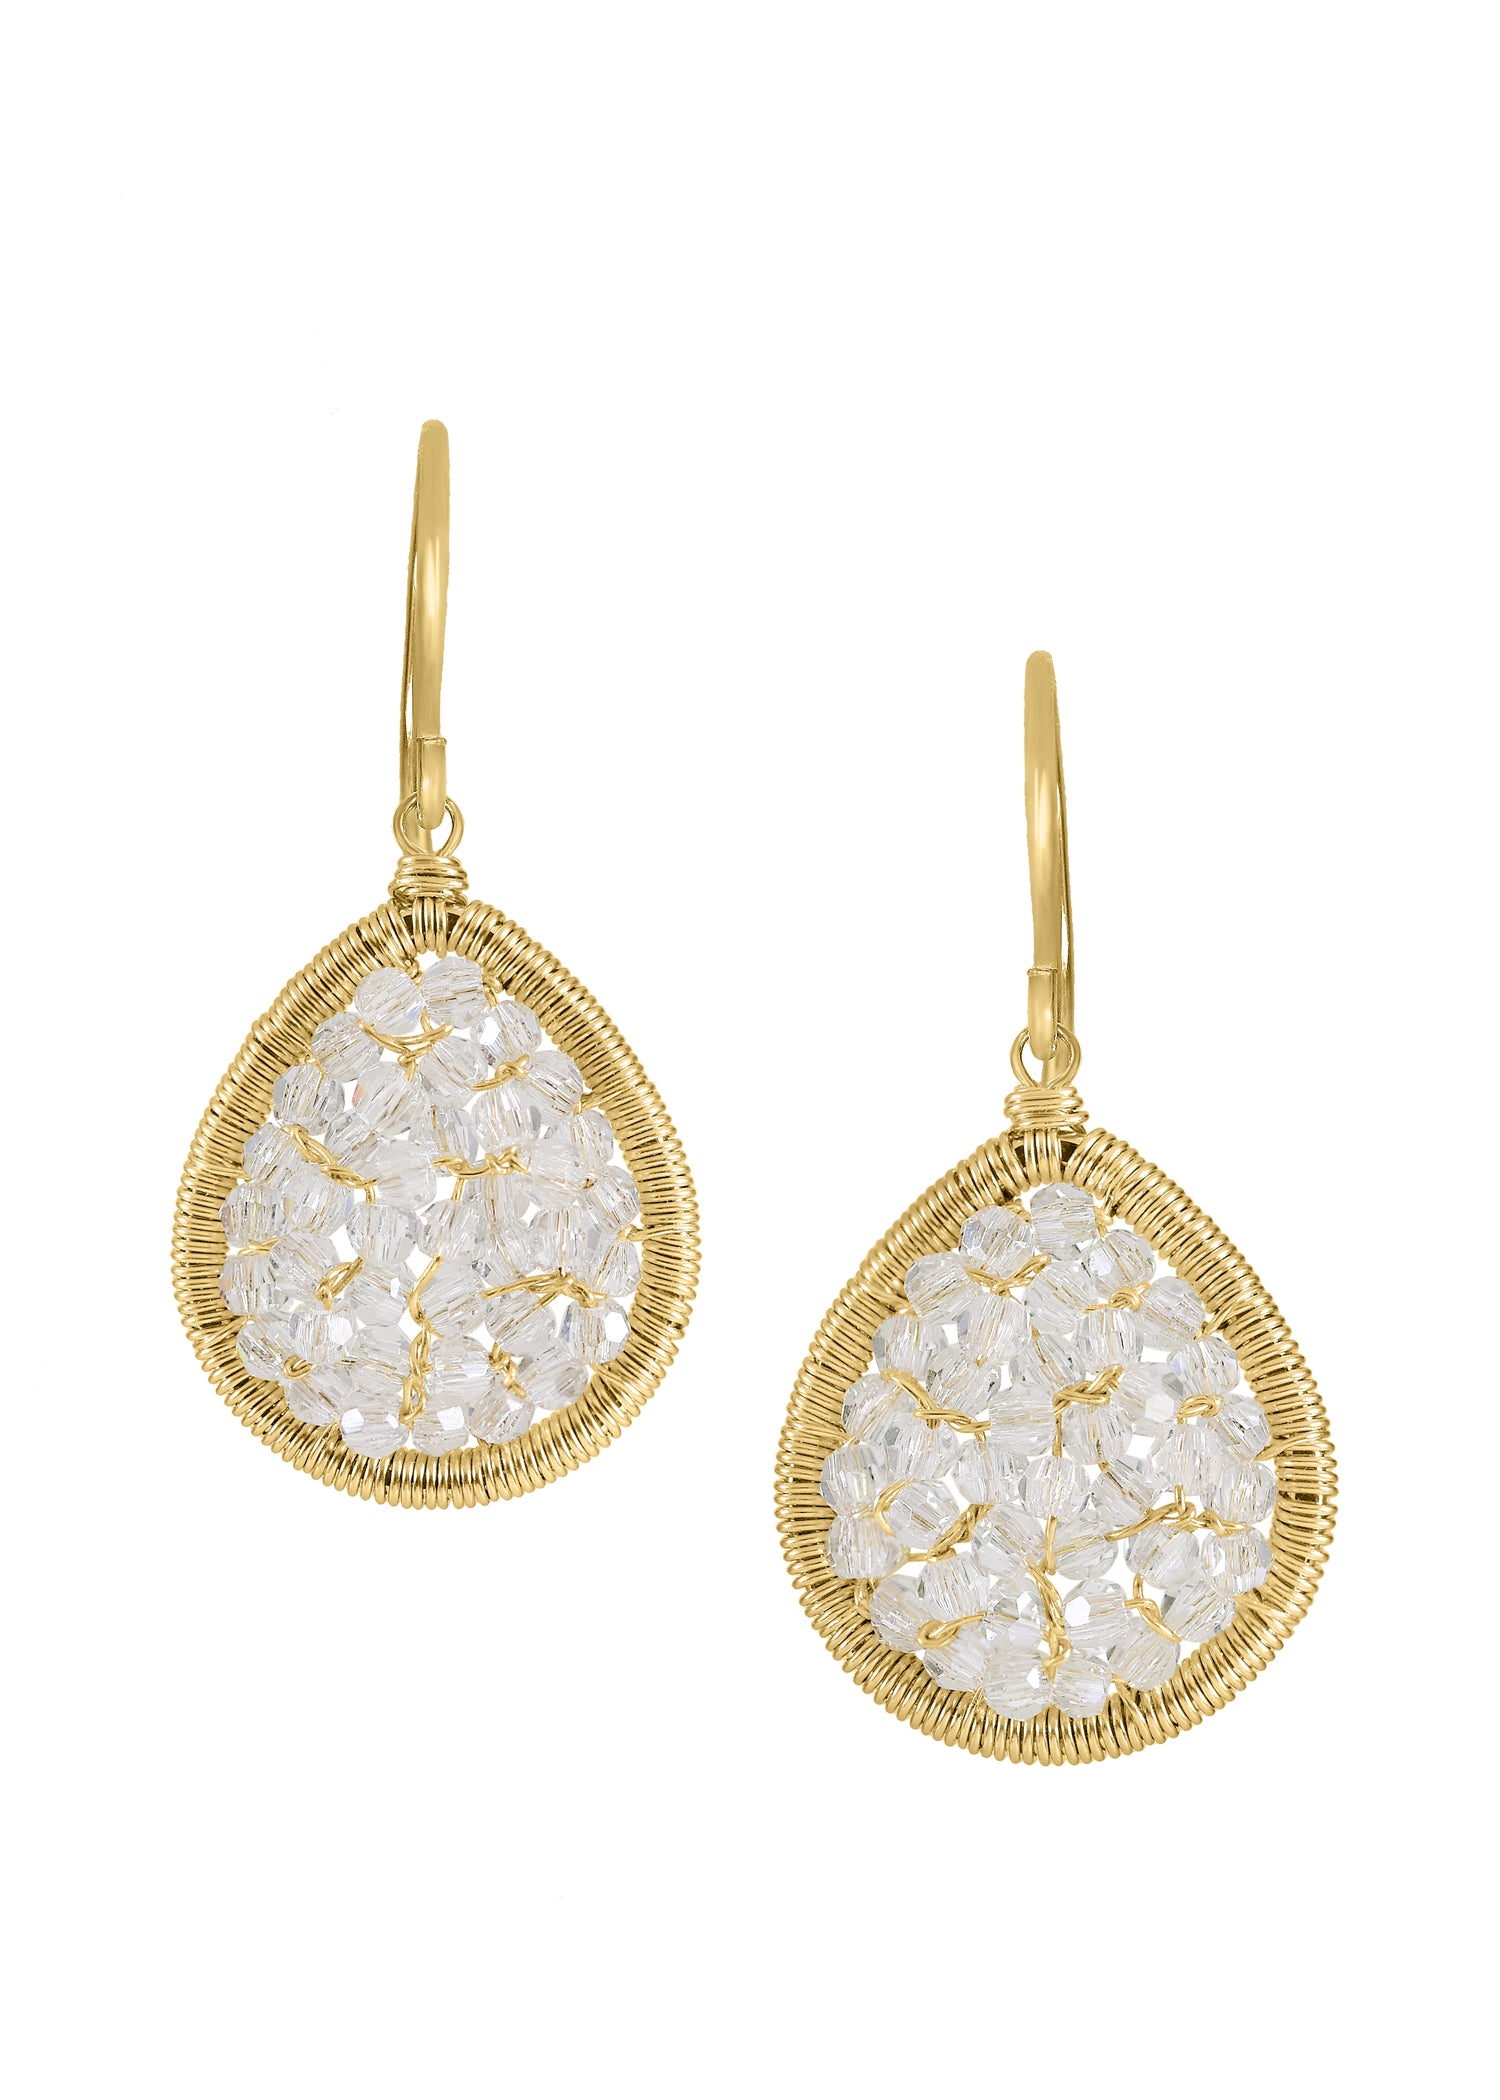 Crystal 14k gold fill Earrings measure 1-1/16" in length (including the ear wires) and 1/2" in width at the widest point Handmade in our Los Angeles studio